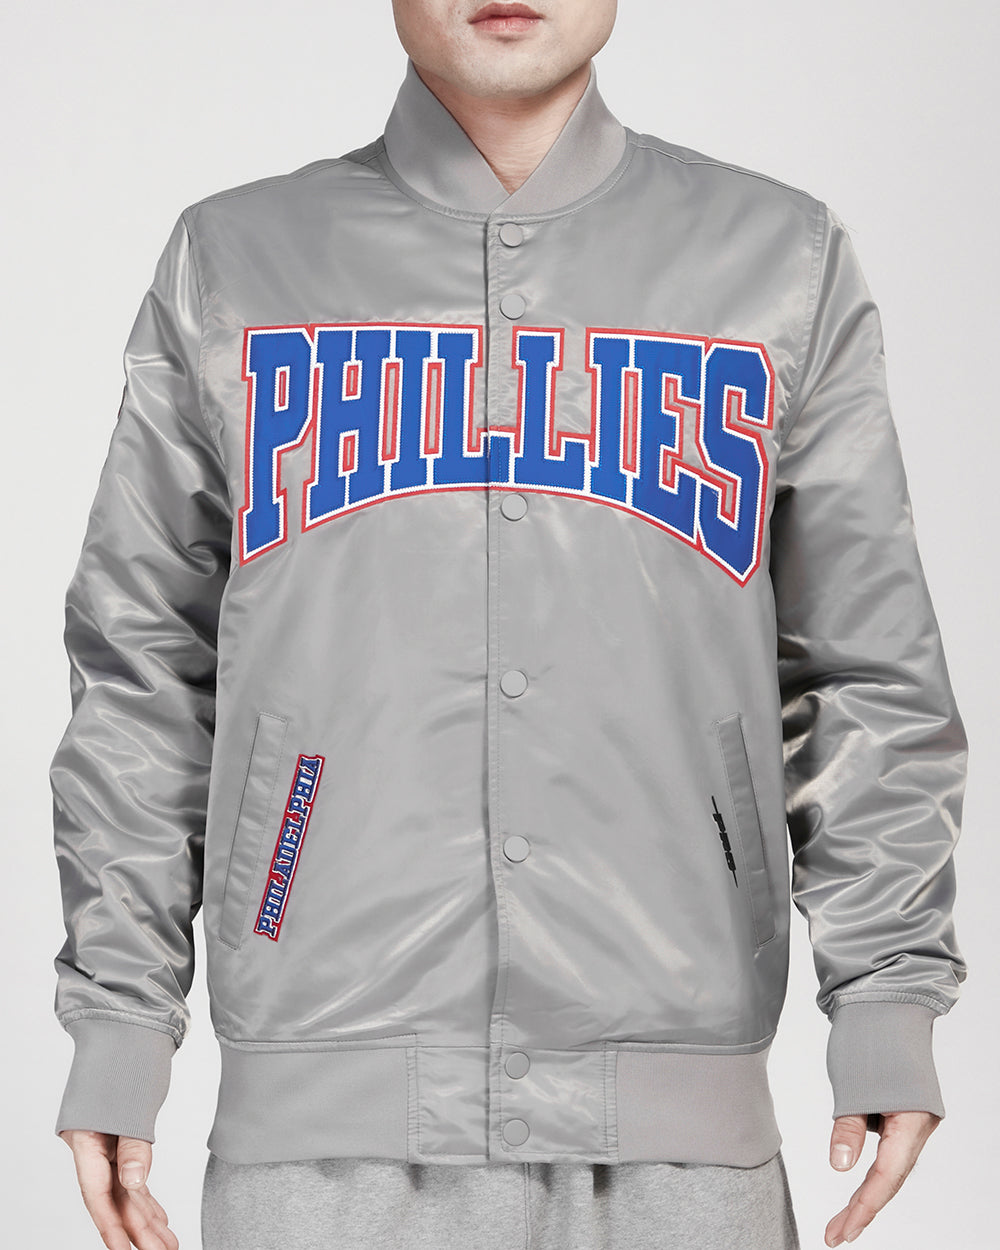 Wool Accent Philadelphia Phillies Varsity Royal Blue and Gray